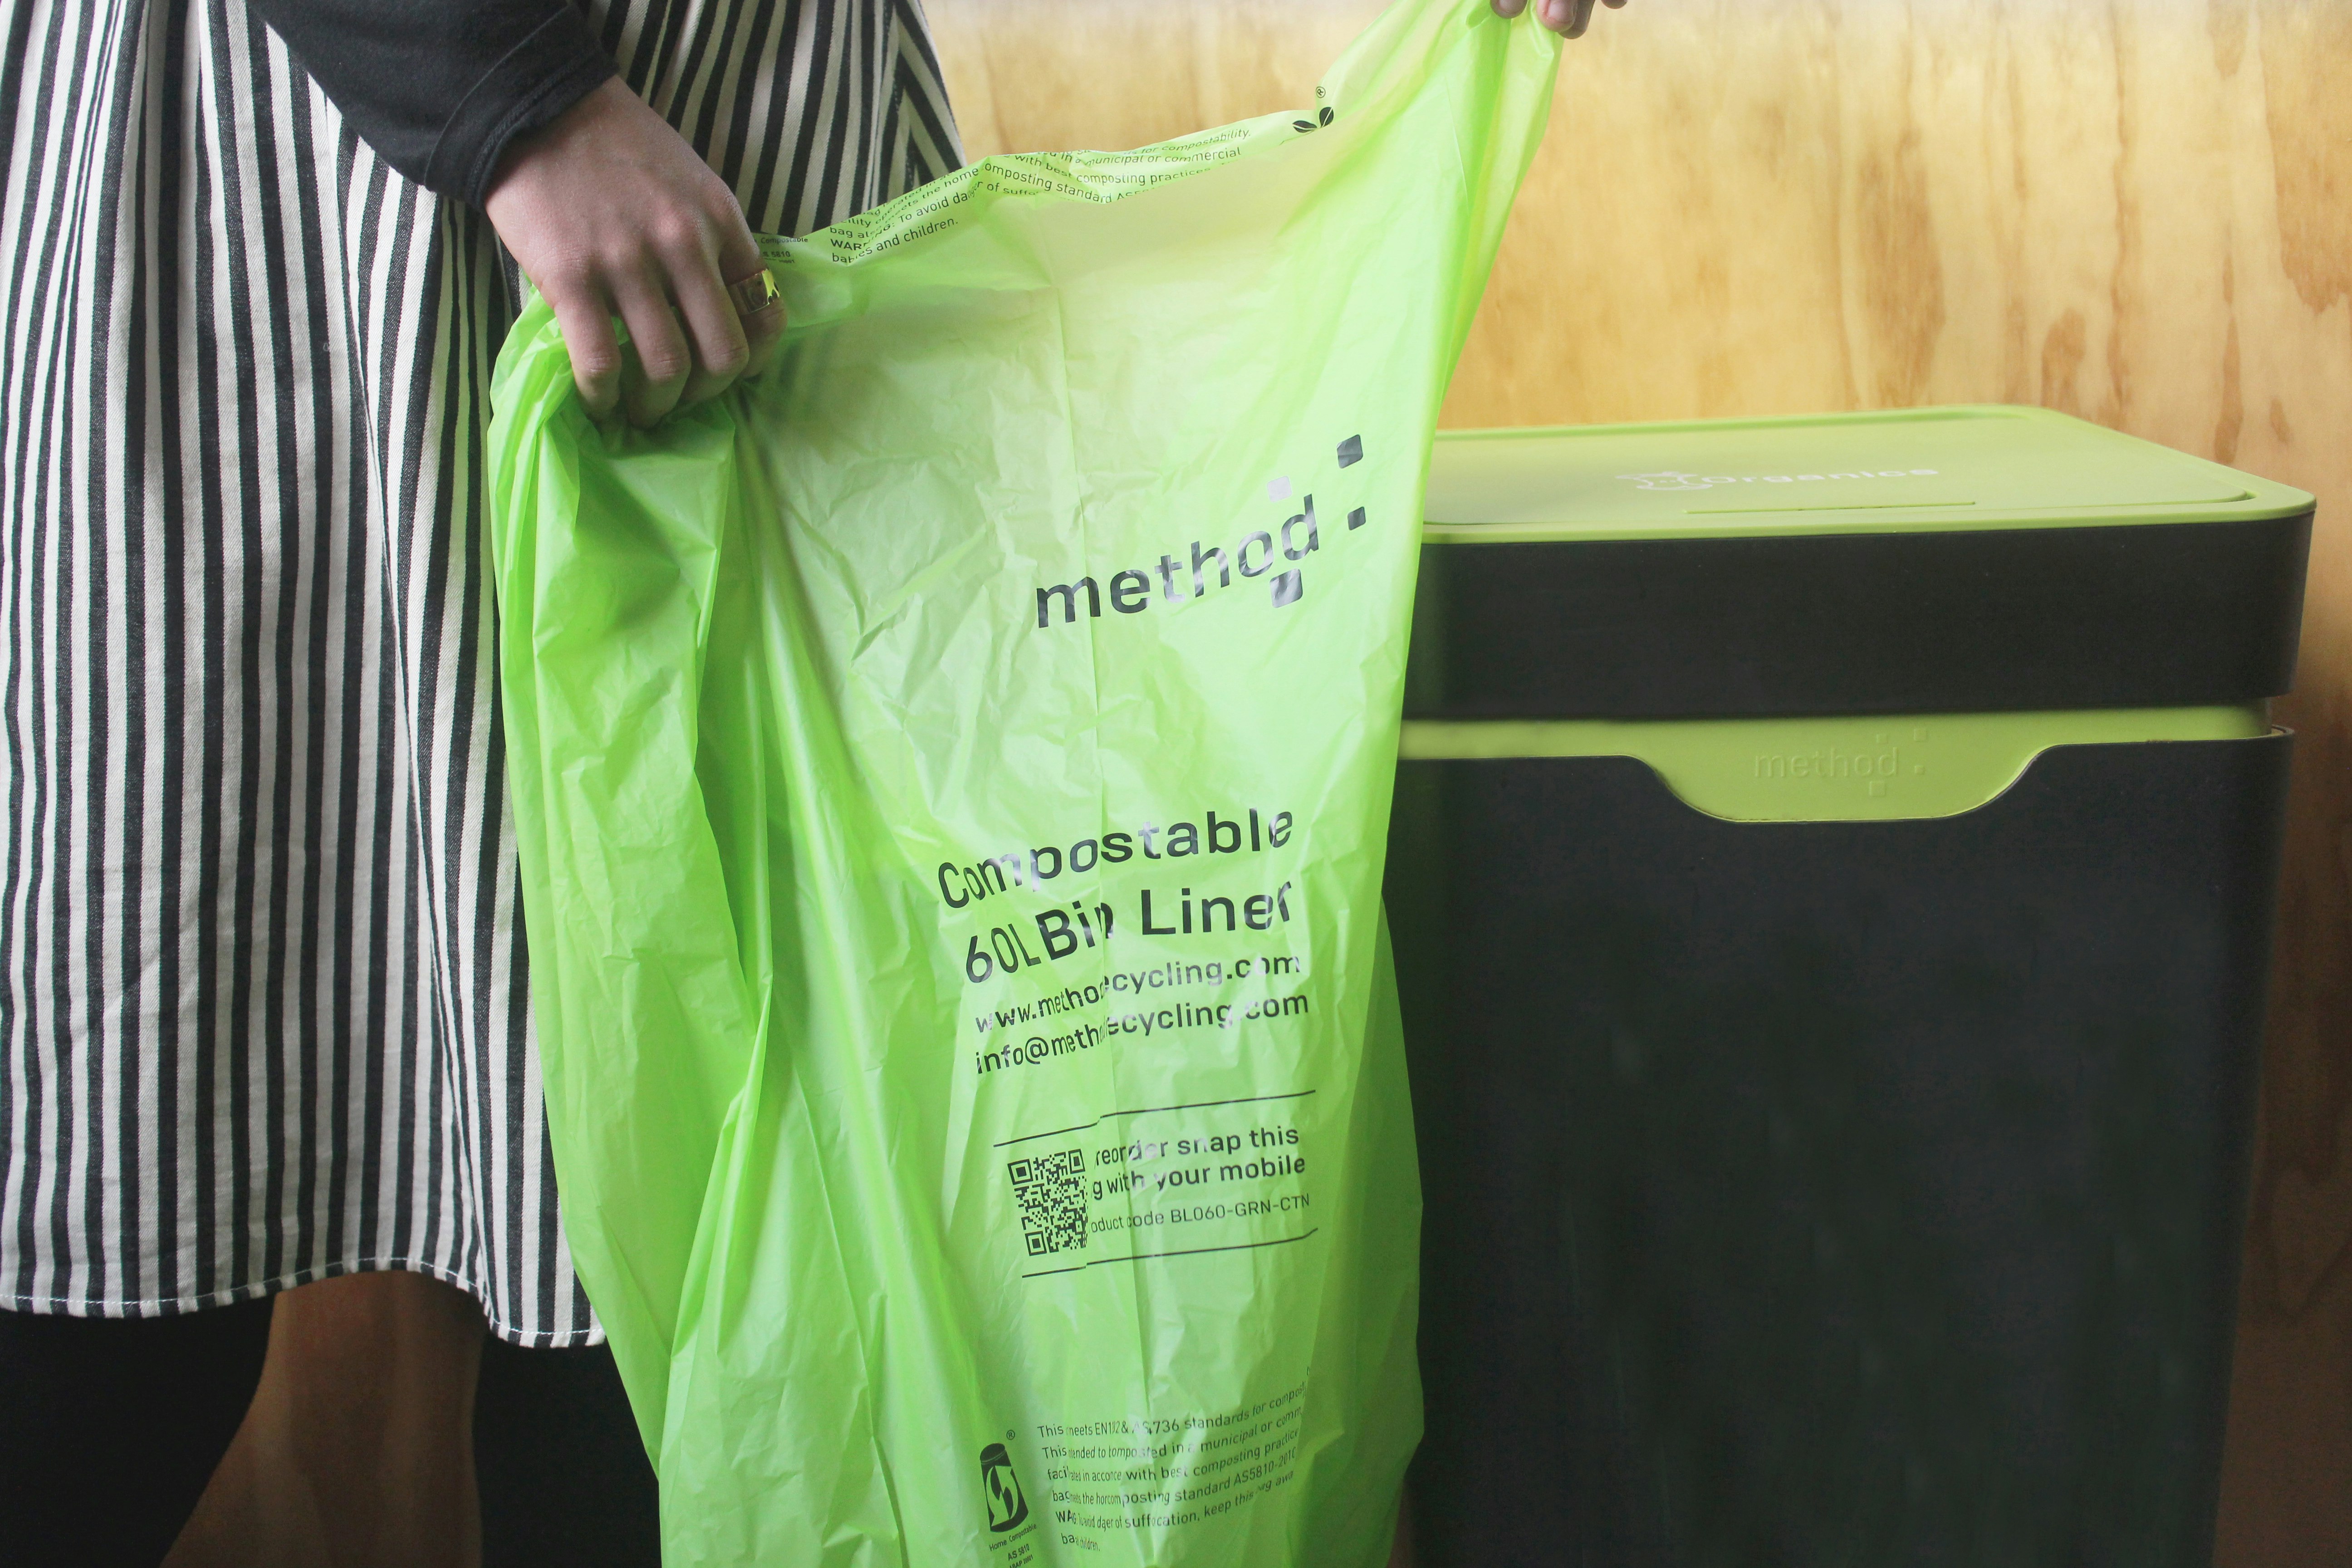 https://methodrecycling.imgix.net/journal/guide-sustainable-bin-liners/Green-Compostable-Liner.JPG?auto=compress%2Cformat&fit=clip&q=80&w=800%20800w